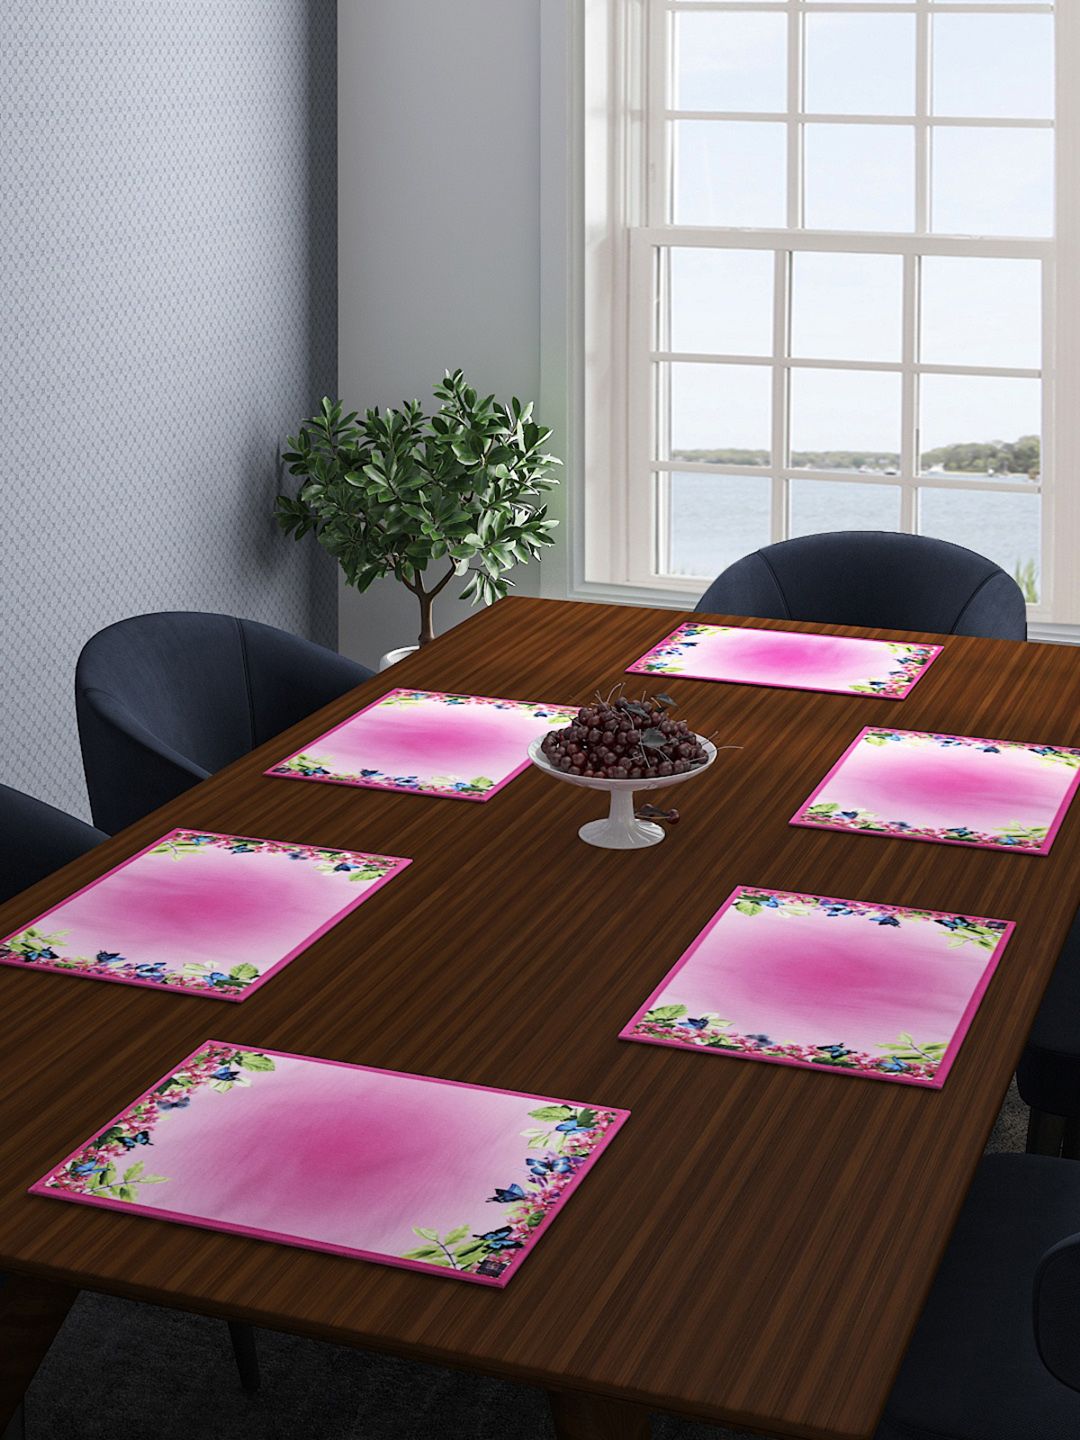 ROMEE Set of 6 Pink Printed Table Mats Price in India